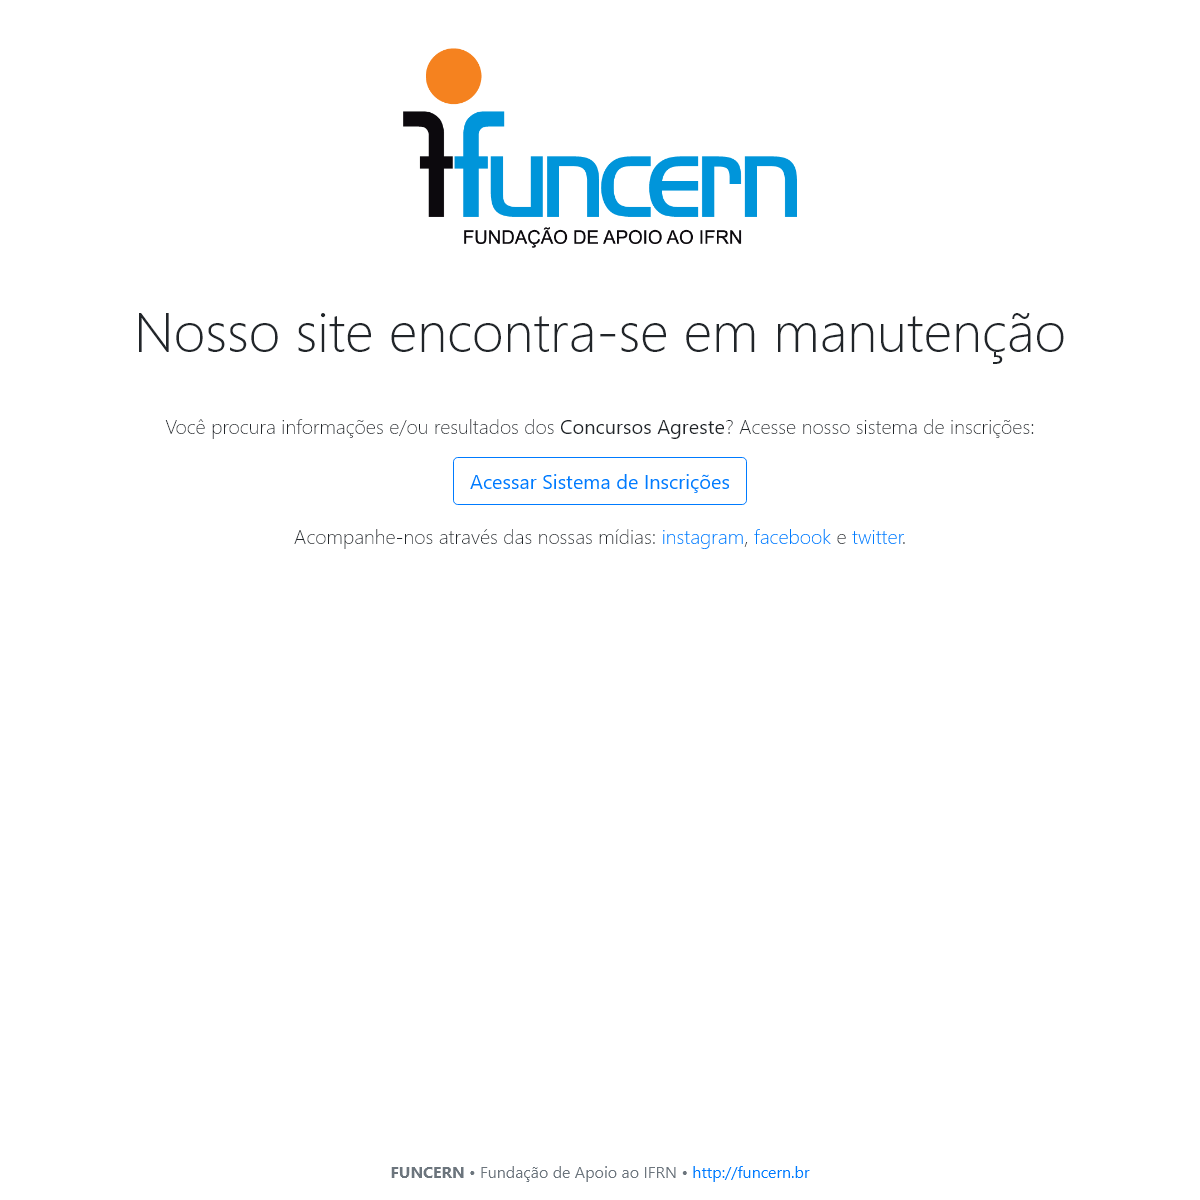 A complete backup of funcern.br